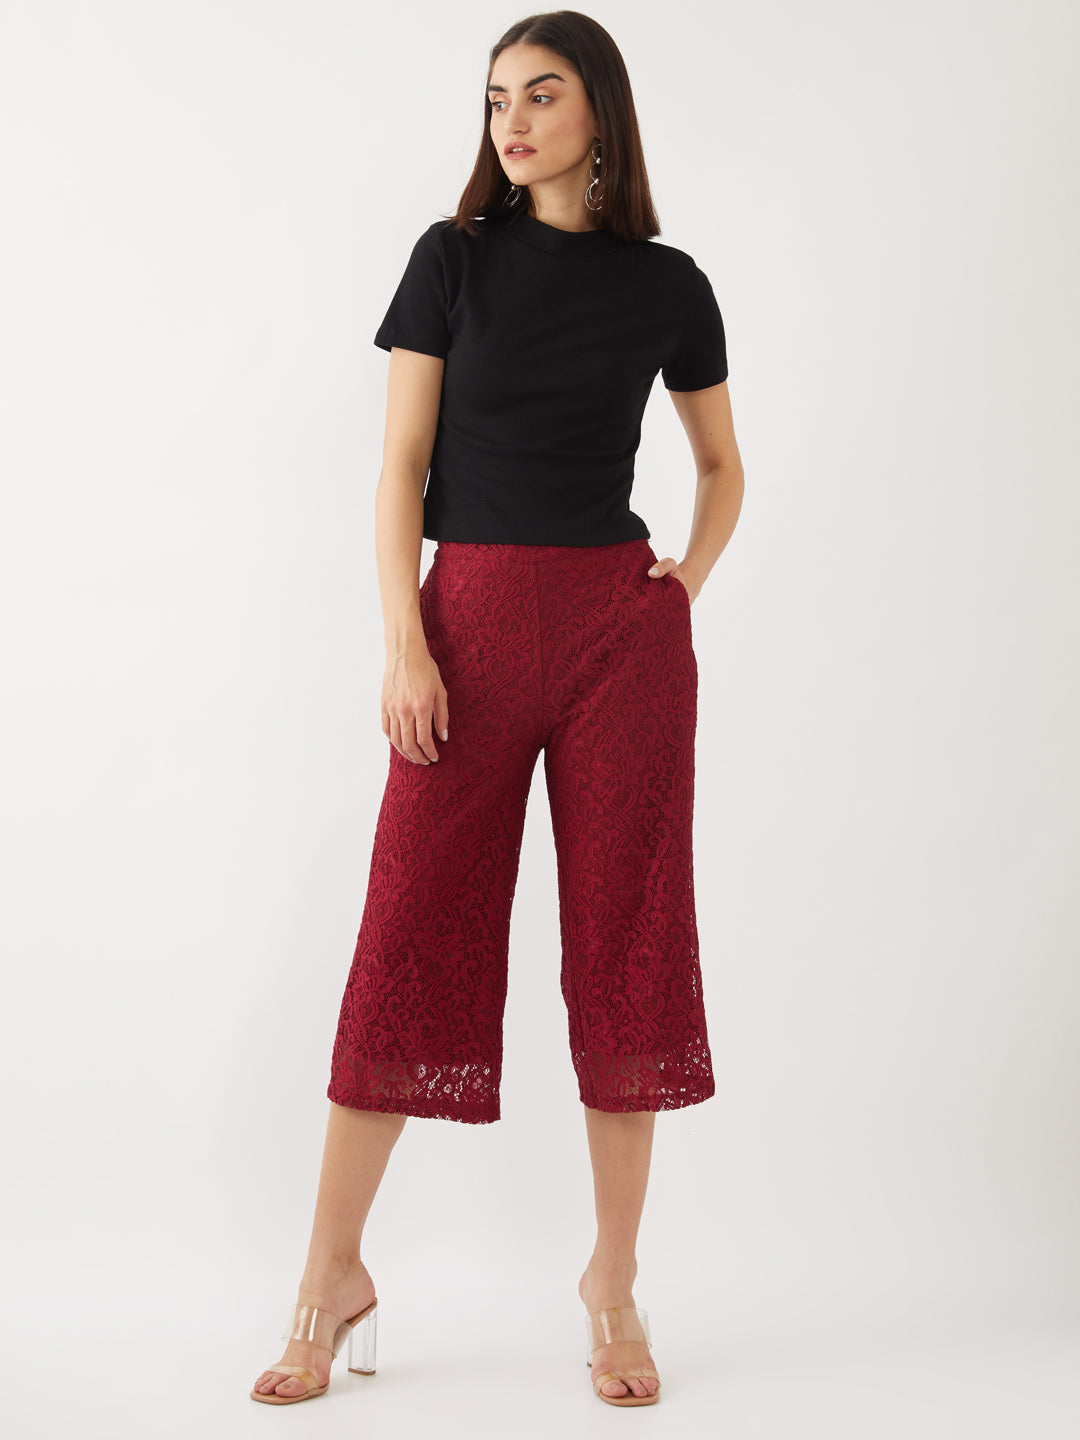 Maroon_Lace_Trouser_1